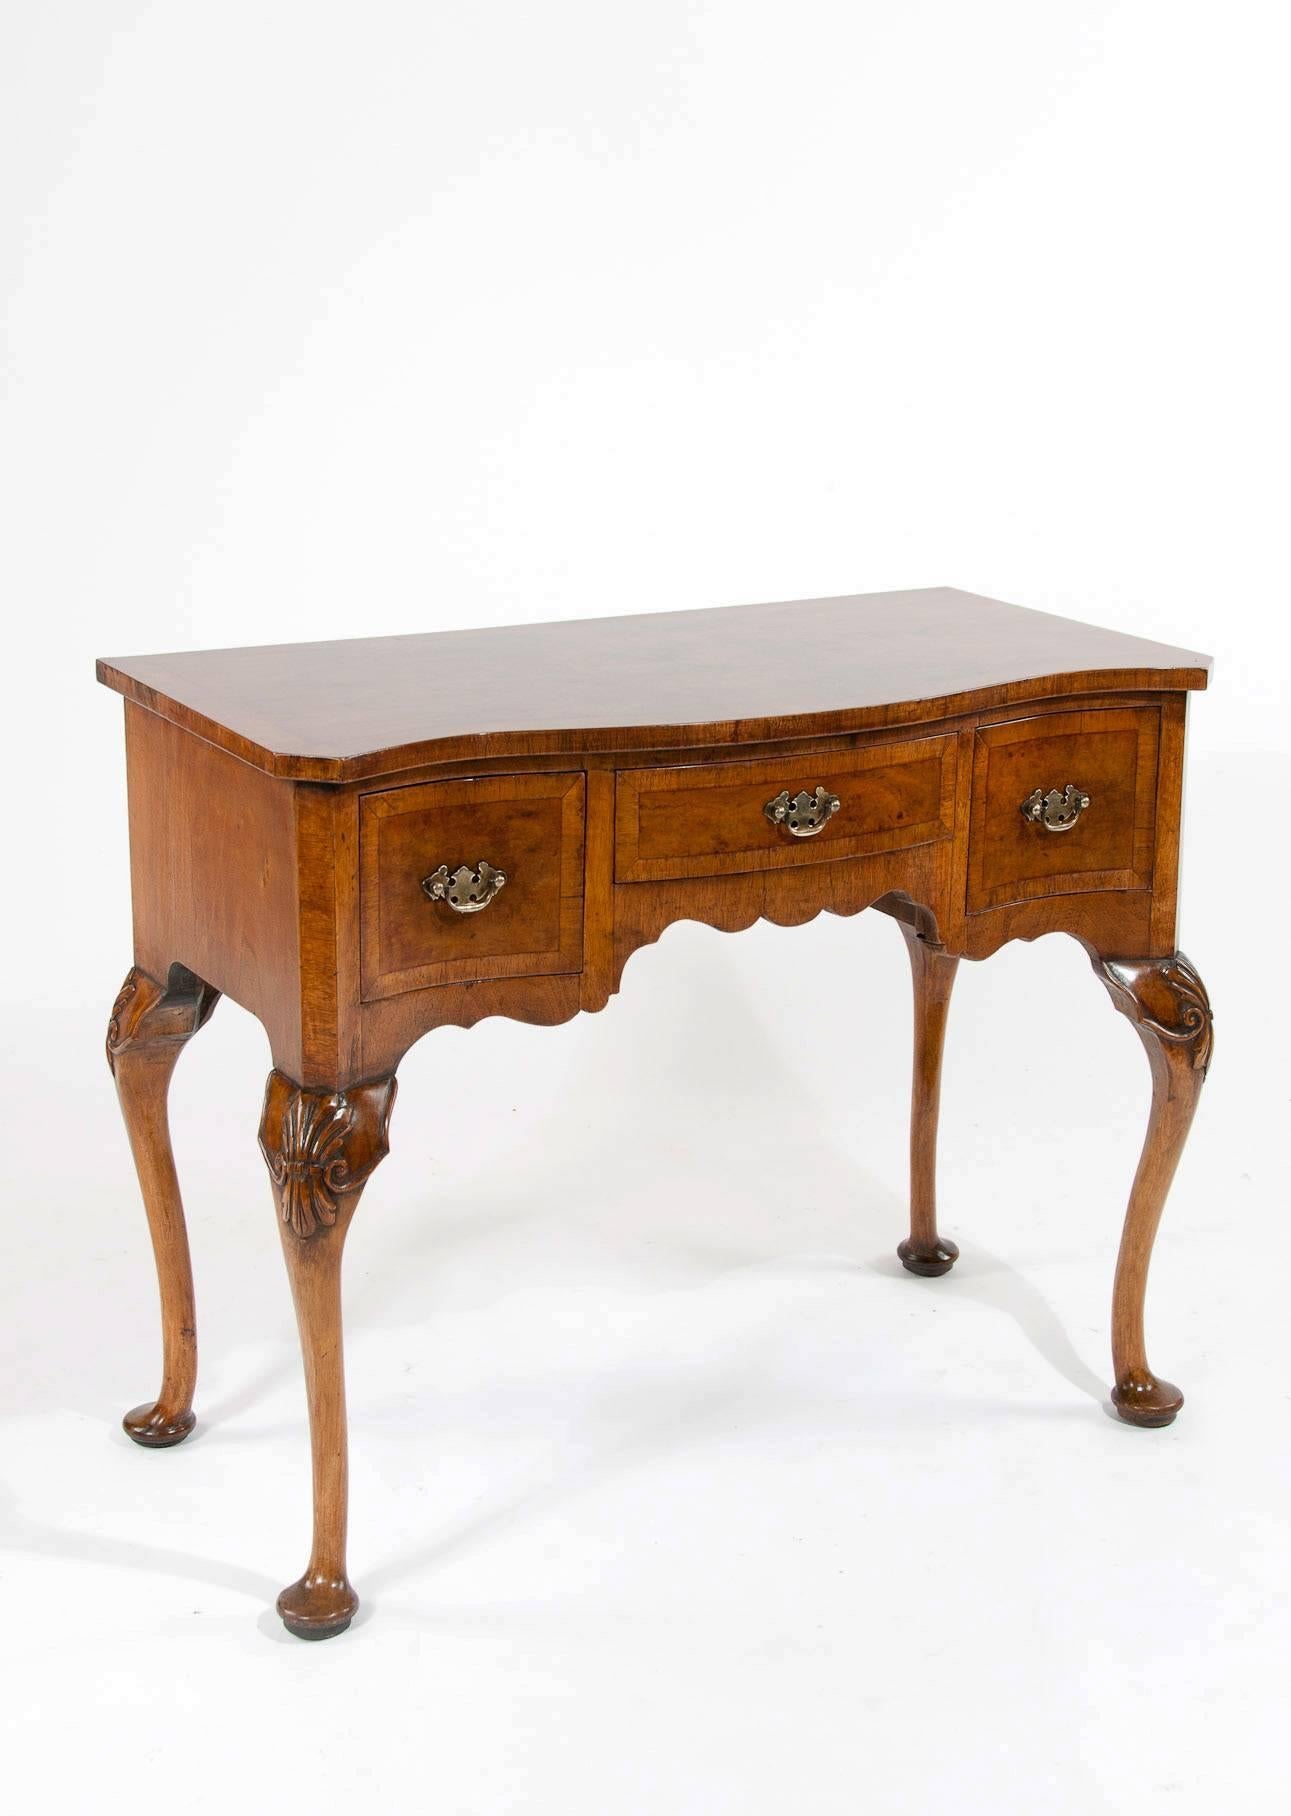 A very good quality antique burr walnut serpentine shaped lowboy stand on cabriole legs. This lovely quality lowboy constructed from fine walnut veneers has a serpentine shaped top being quarter veneered in figured walnut with a crossbanded edge